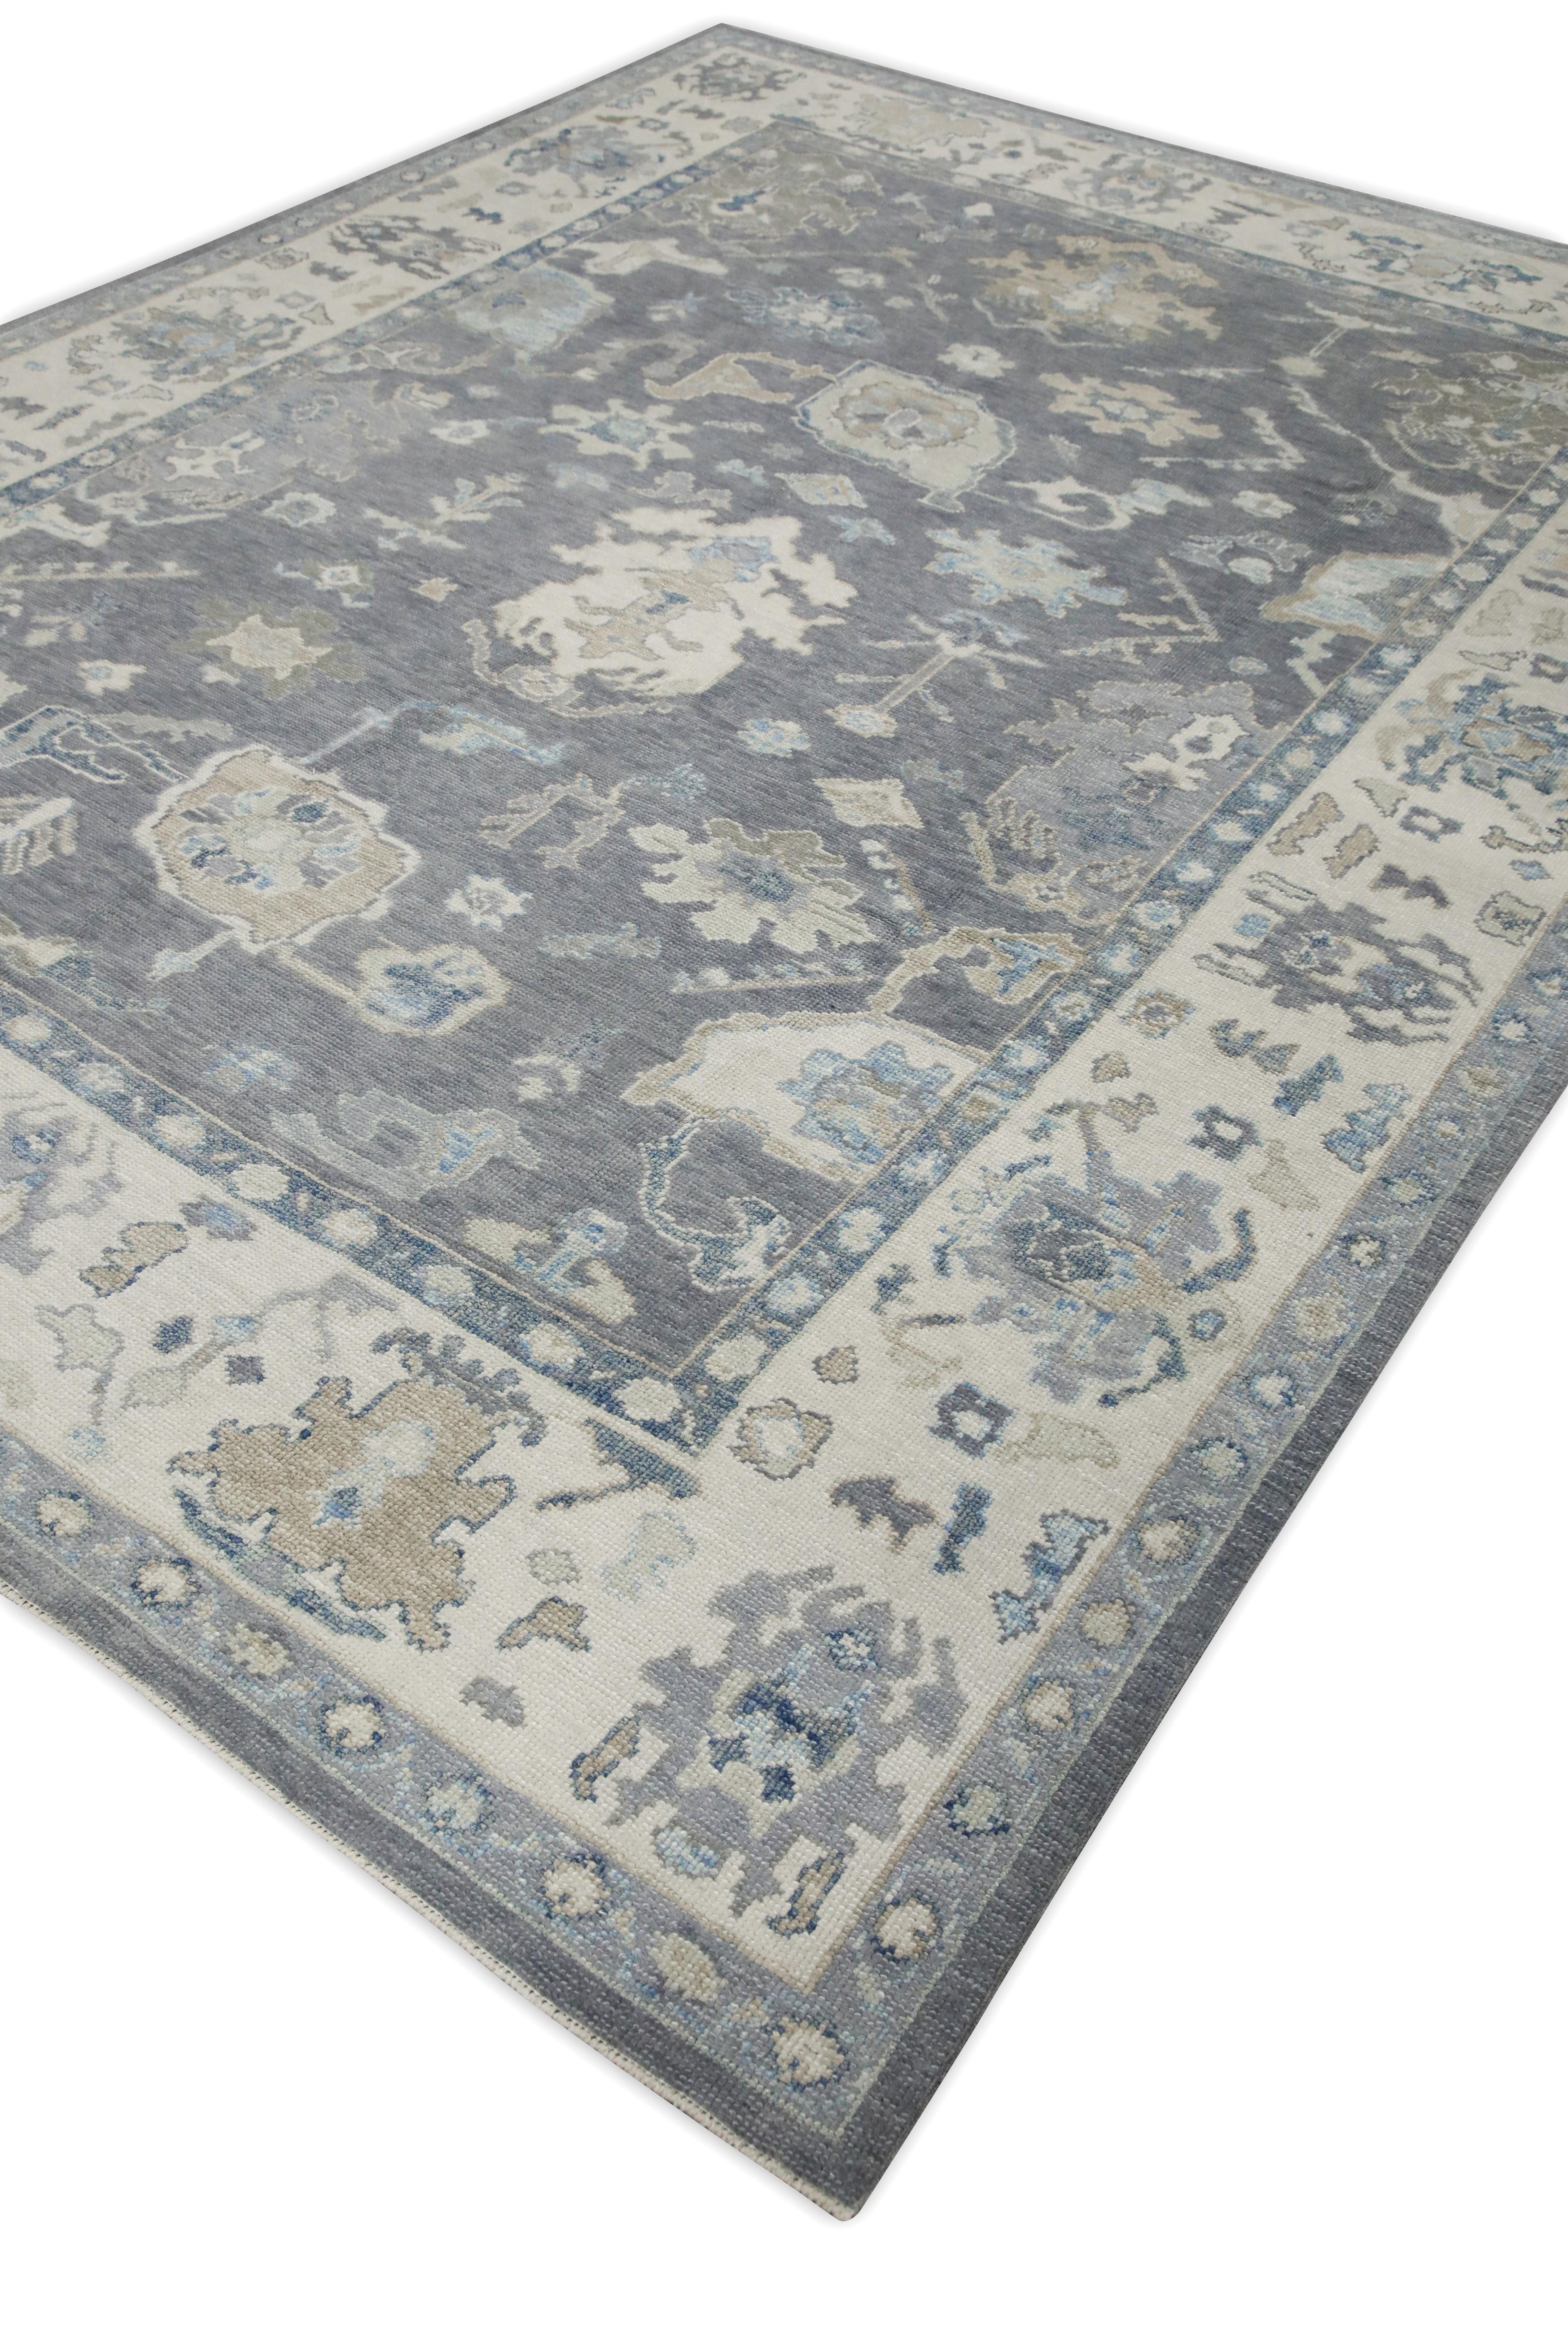 Contemporary Gray & Blue Floral Design Handwoven Wool Turkish Oushak Rug 8'9